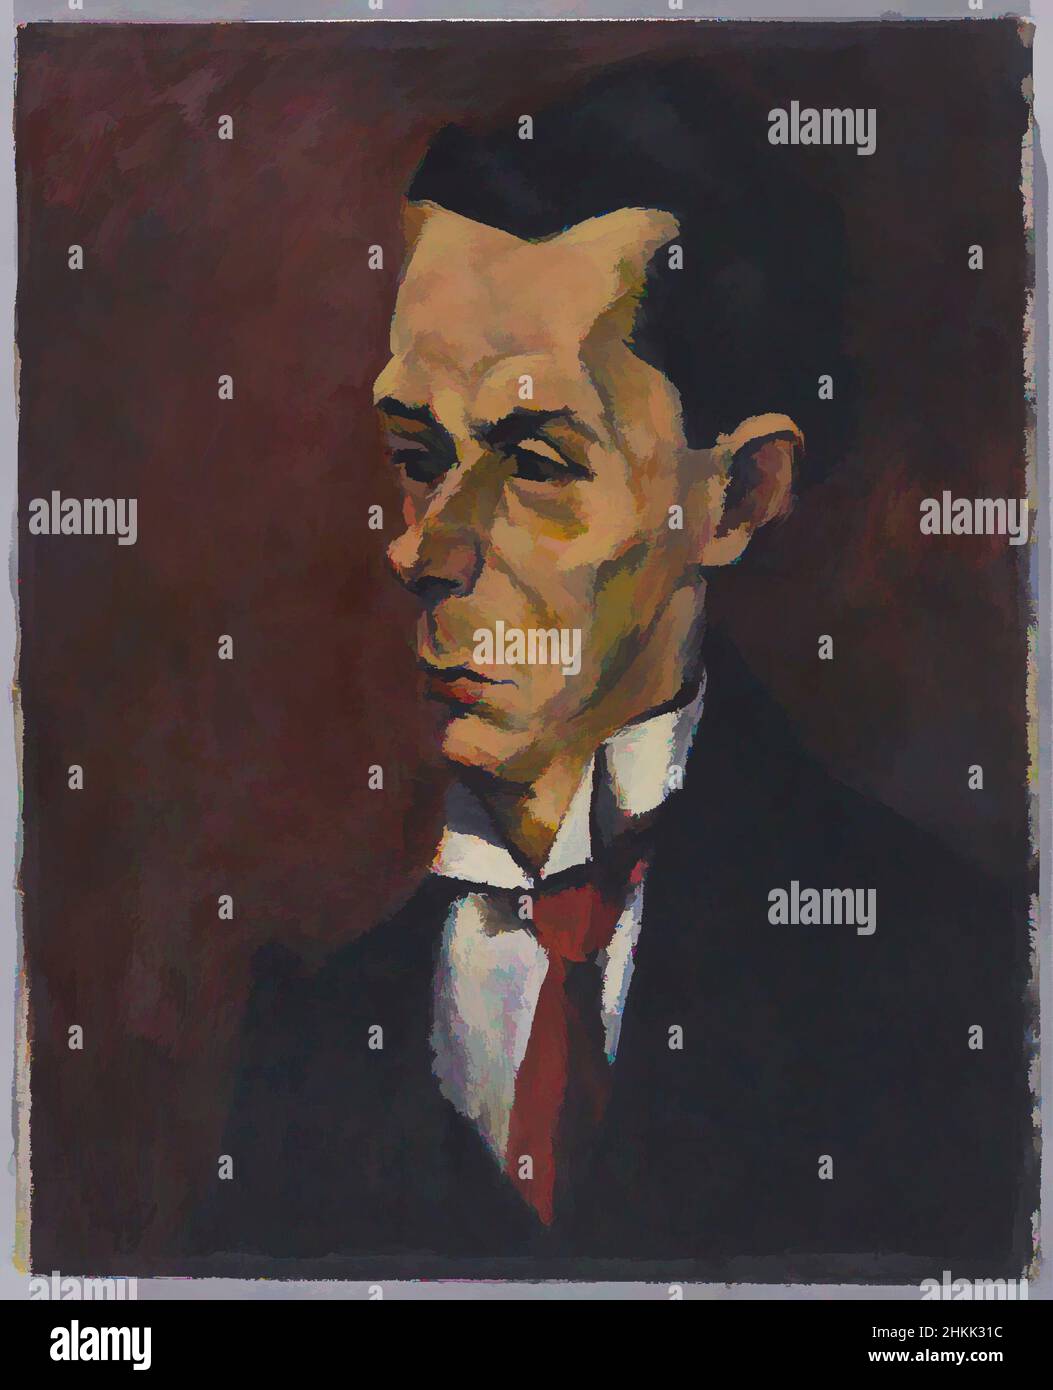 Art inspired by The Critic, Lajos Tihanyi, Hungarian, 1885-1938, Oil on canvas, Hungary, 1916, 20 1/8 x 16 3/8 in., 51.1 x 41.6 cm, cheekbones, collar, critic, European, European art, facet, Hungarian oil, man, portrait, sourpuss, tie, Classic works modernized by Artotop with a splash of modernity. Shapes, color and value, eye-catching visual impact on art. Emotions through freedom of artworks in a contemporary way. A timeless message pursuing a wildly creative new direction. Artists turning to the digital medium and creating the Artotop NFT Stock Photo